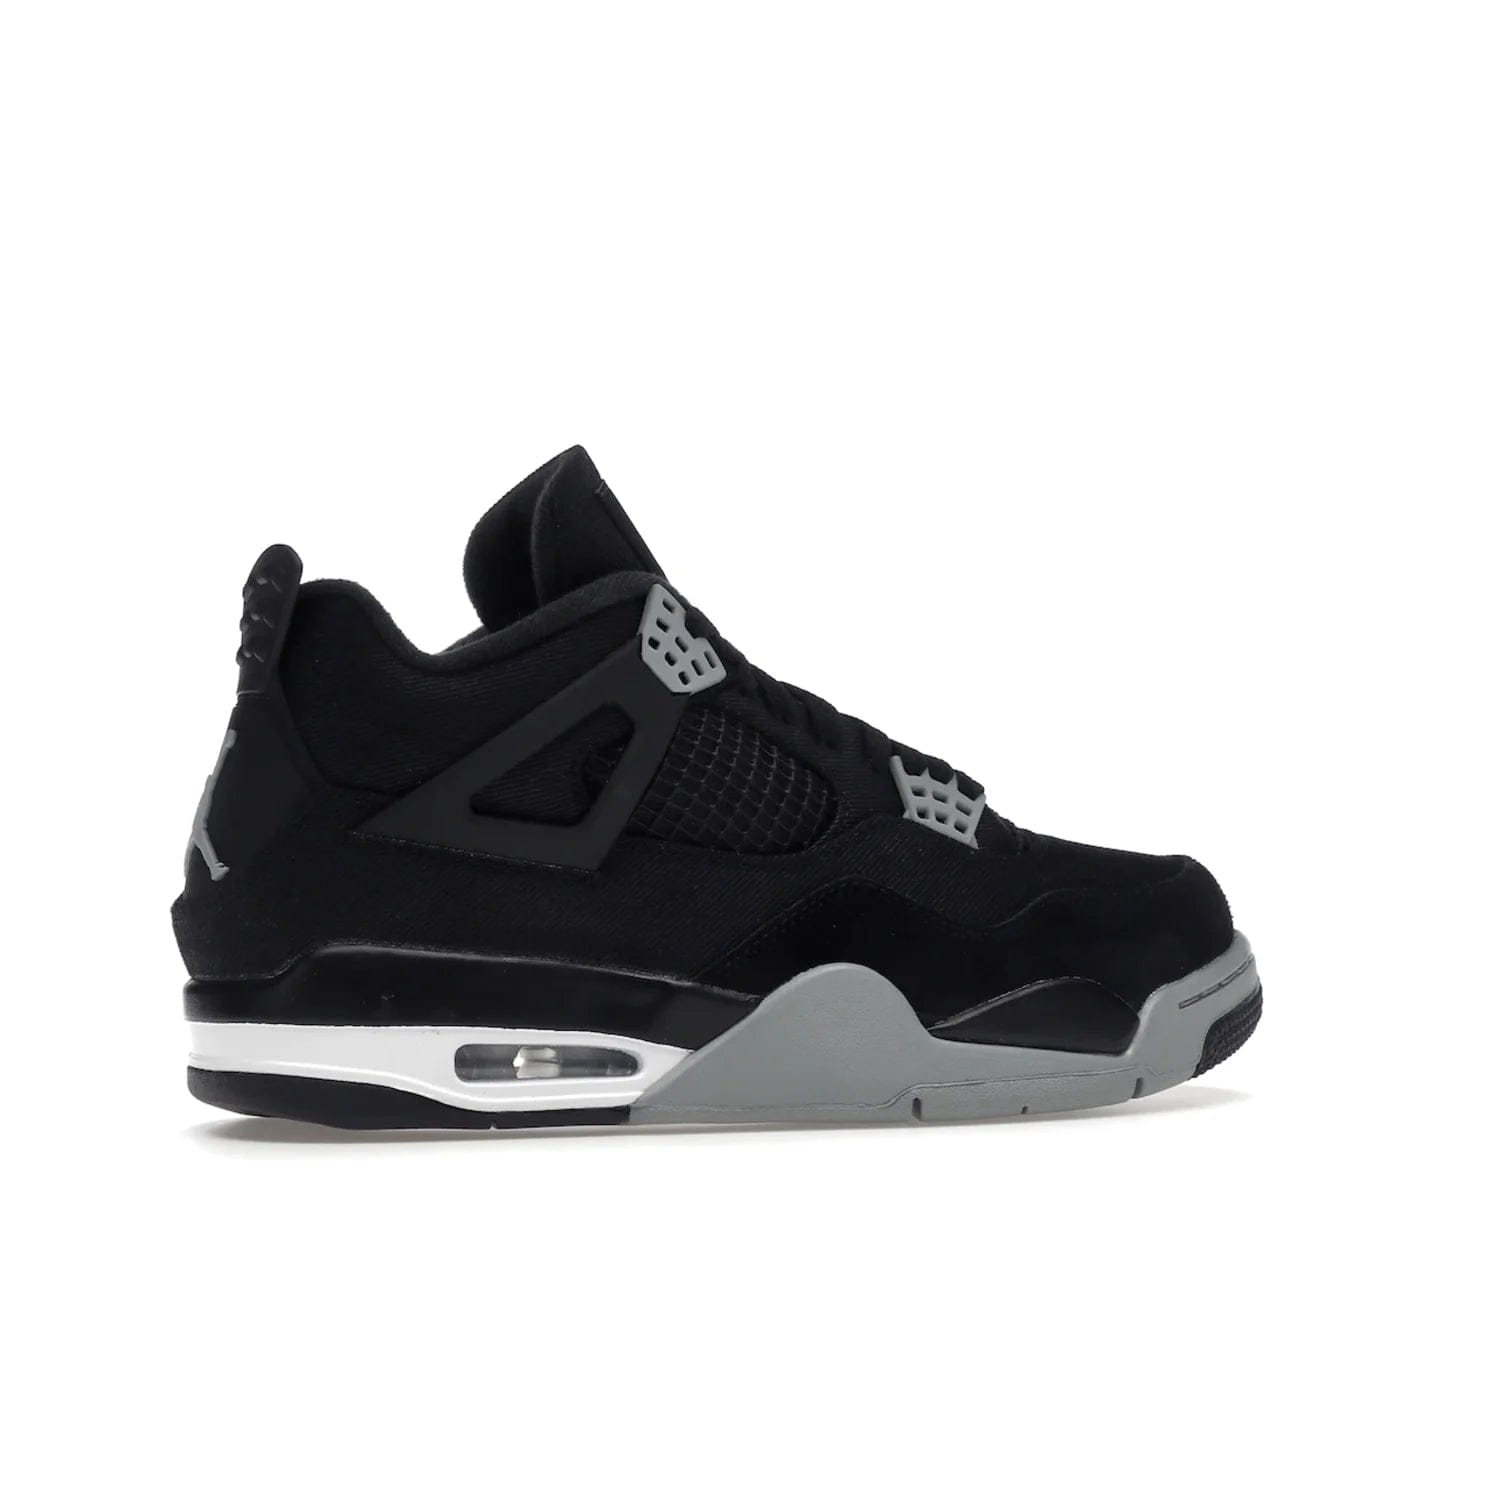 Jordan 4 Retro SE Black Canvas - Image 35 - Only at www.BallersClubKickz.com - The Air Jordan 4 Retro SE Black Canvas brings timeless style and modern luxury. Classic mid-top sneaker in black canvas and grey suede with tonal Jumpman logo, Flight logo and polyurethane midsole with visible Air-sole cushioning. Refresh your sneaker collection and rock the Air Jordan 4 Retro SE Black Canvas.